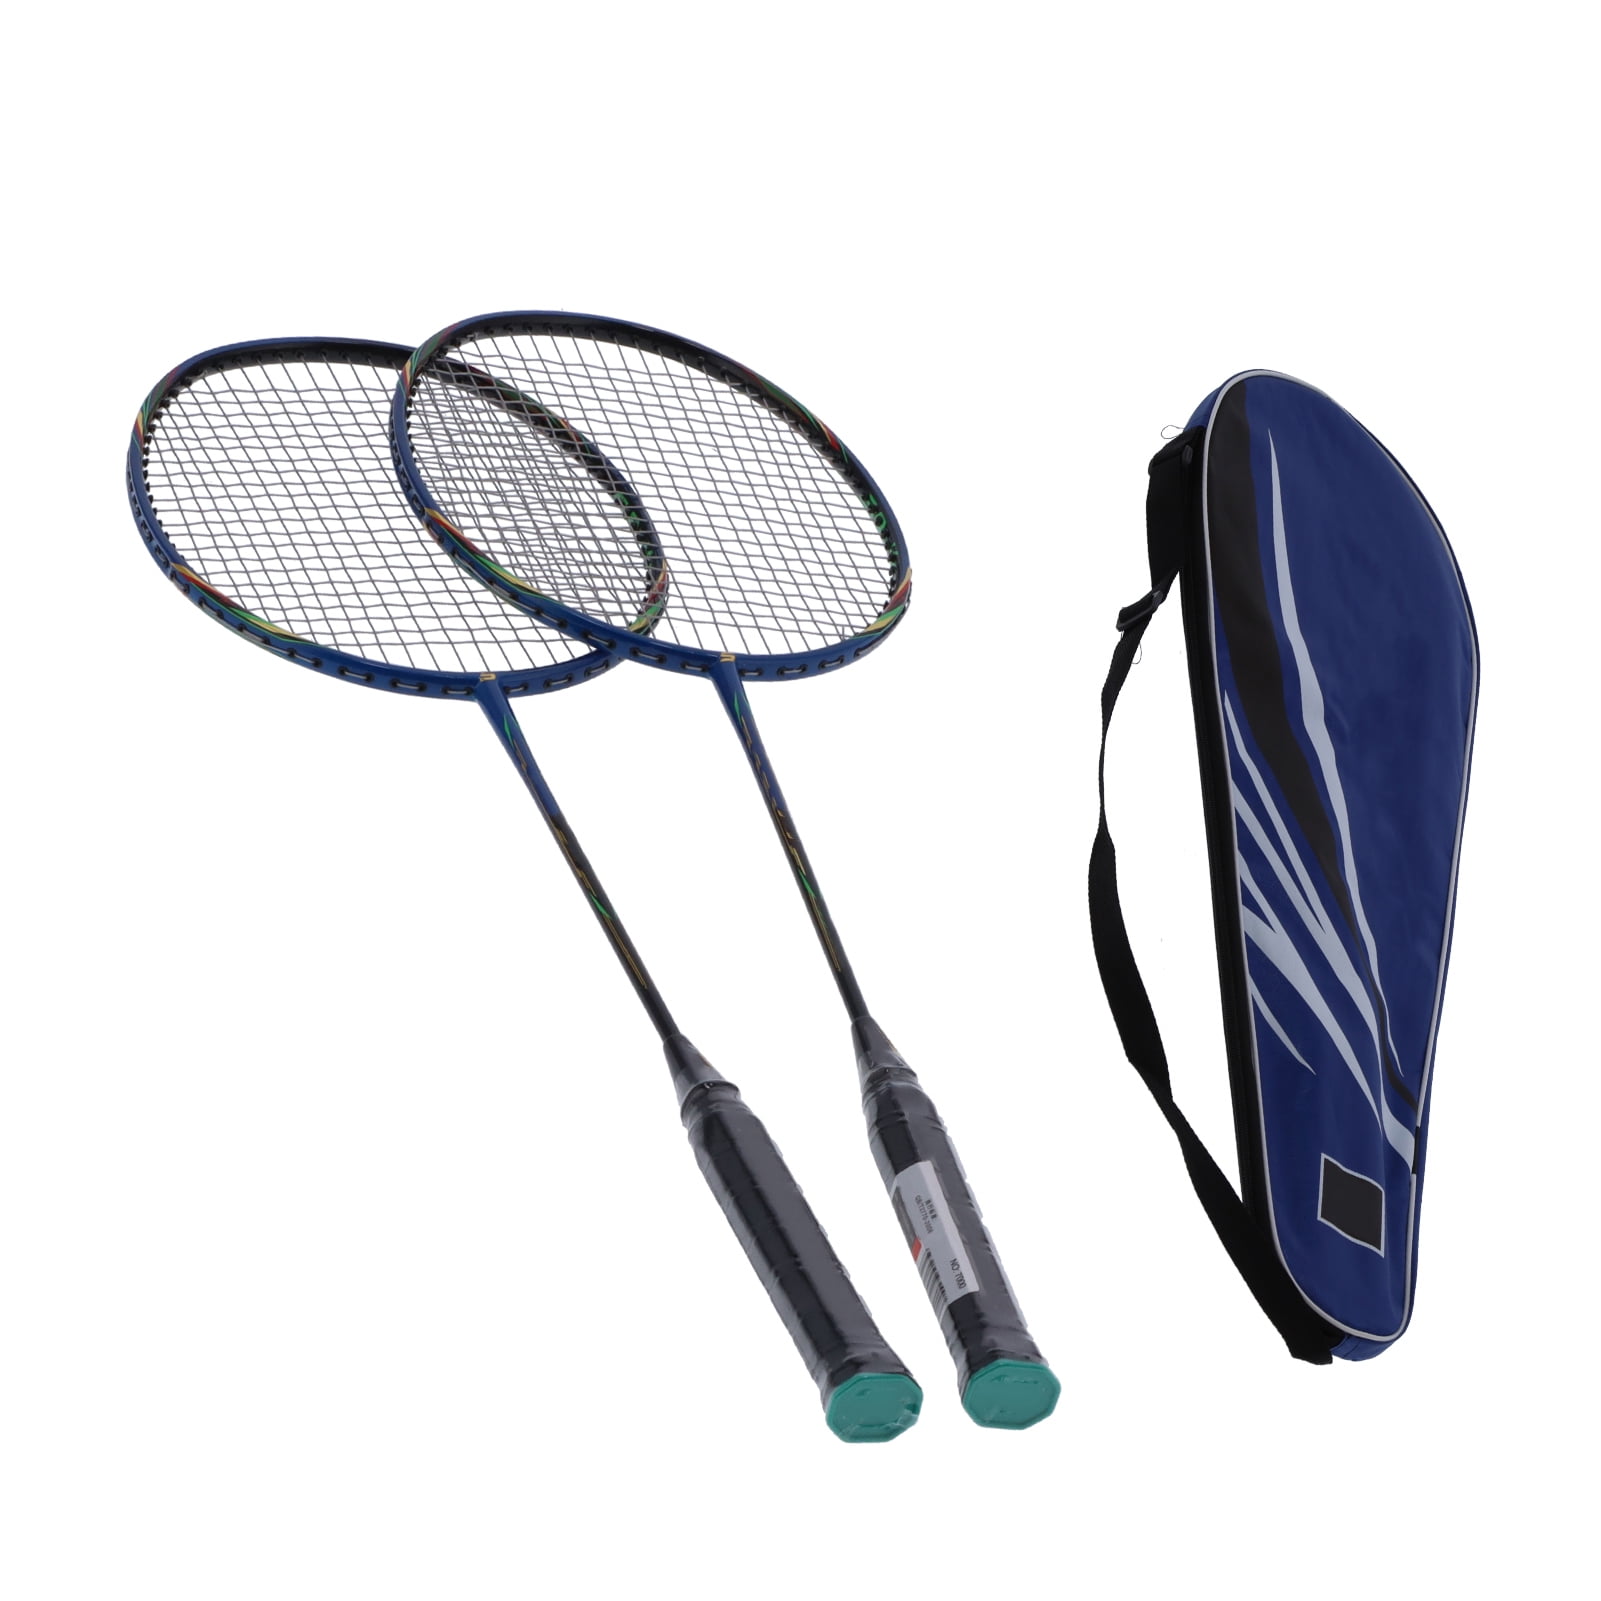 2 Player Badminton Racquets, Lightweight Badminton Racquet Bad Mitten Sets Badminton Racquets For Adults For Adults For Helps To Keep Fit